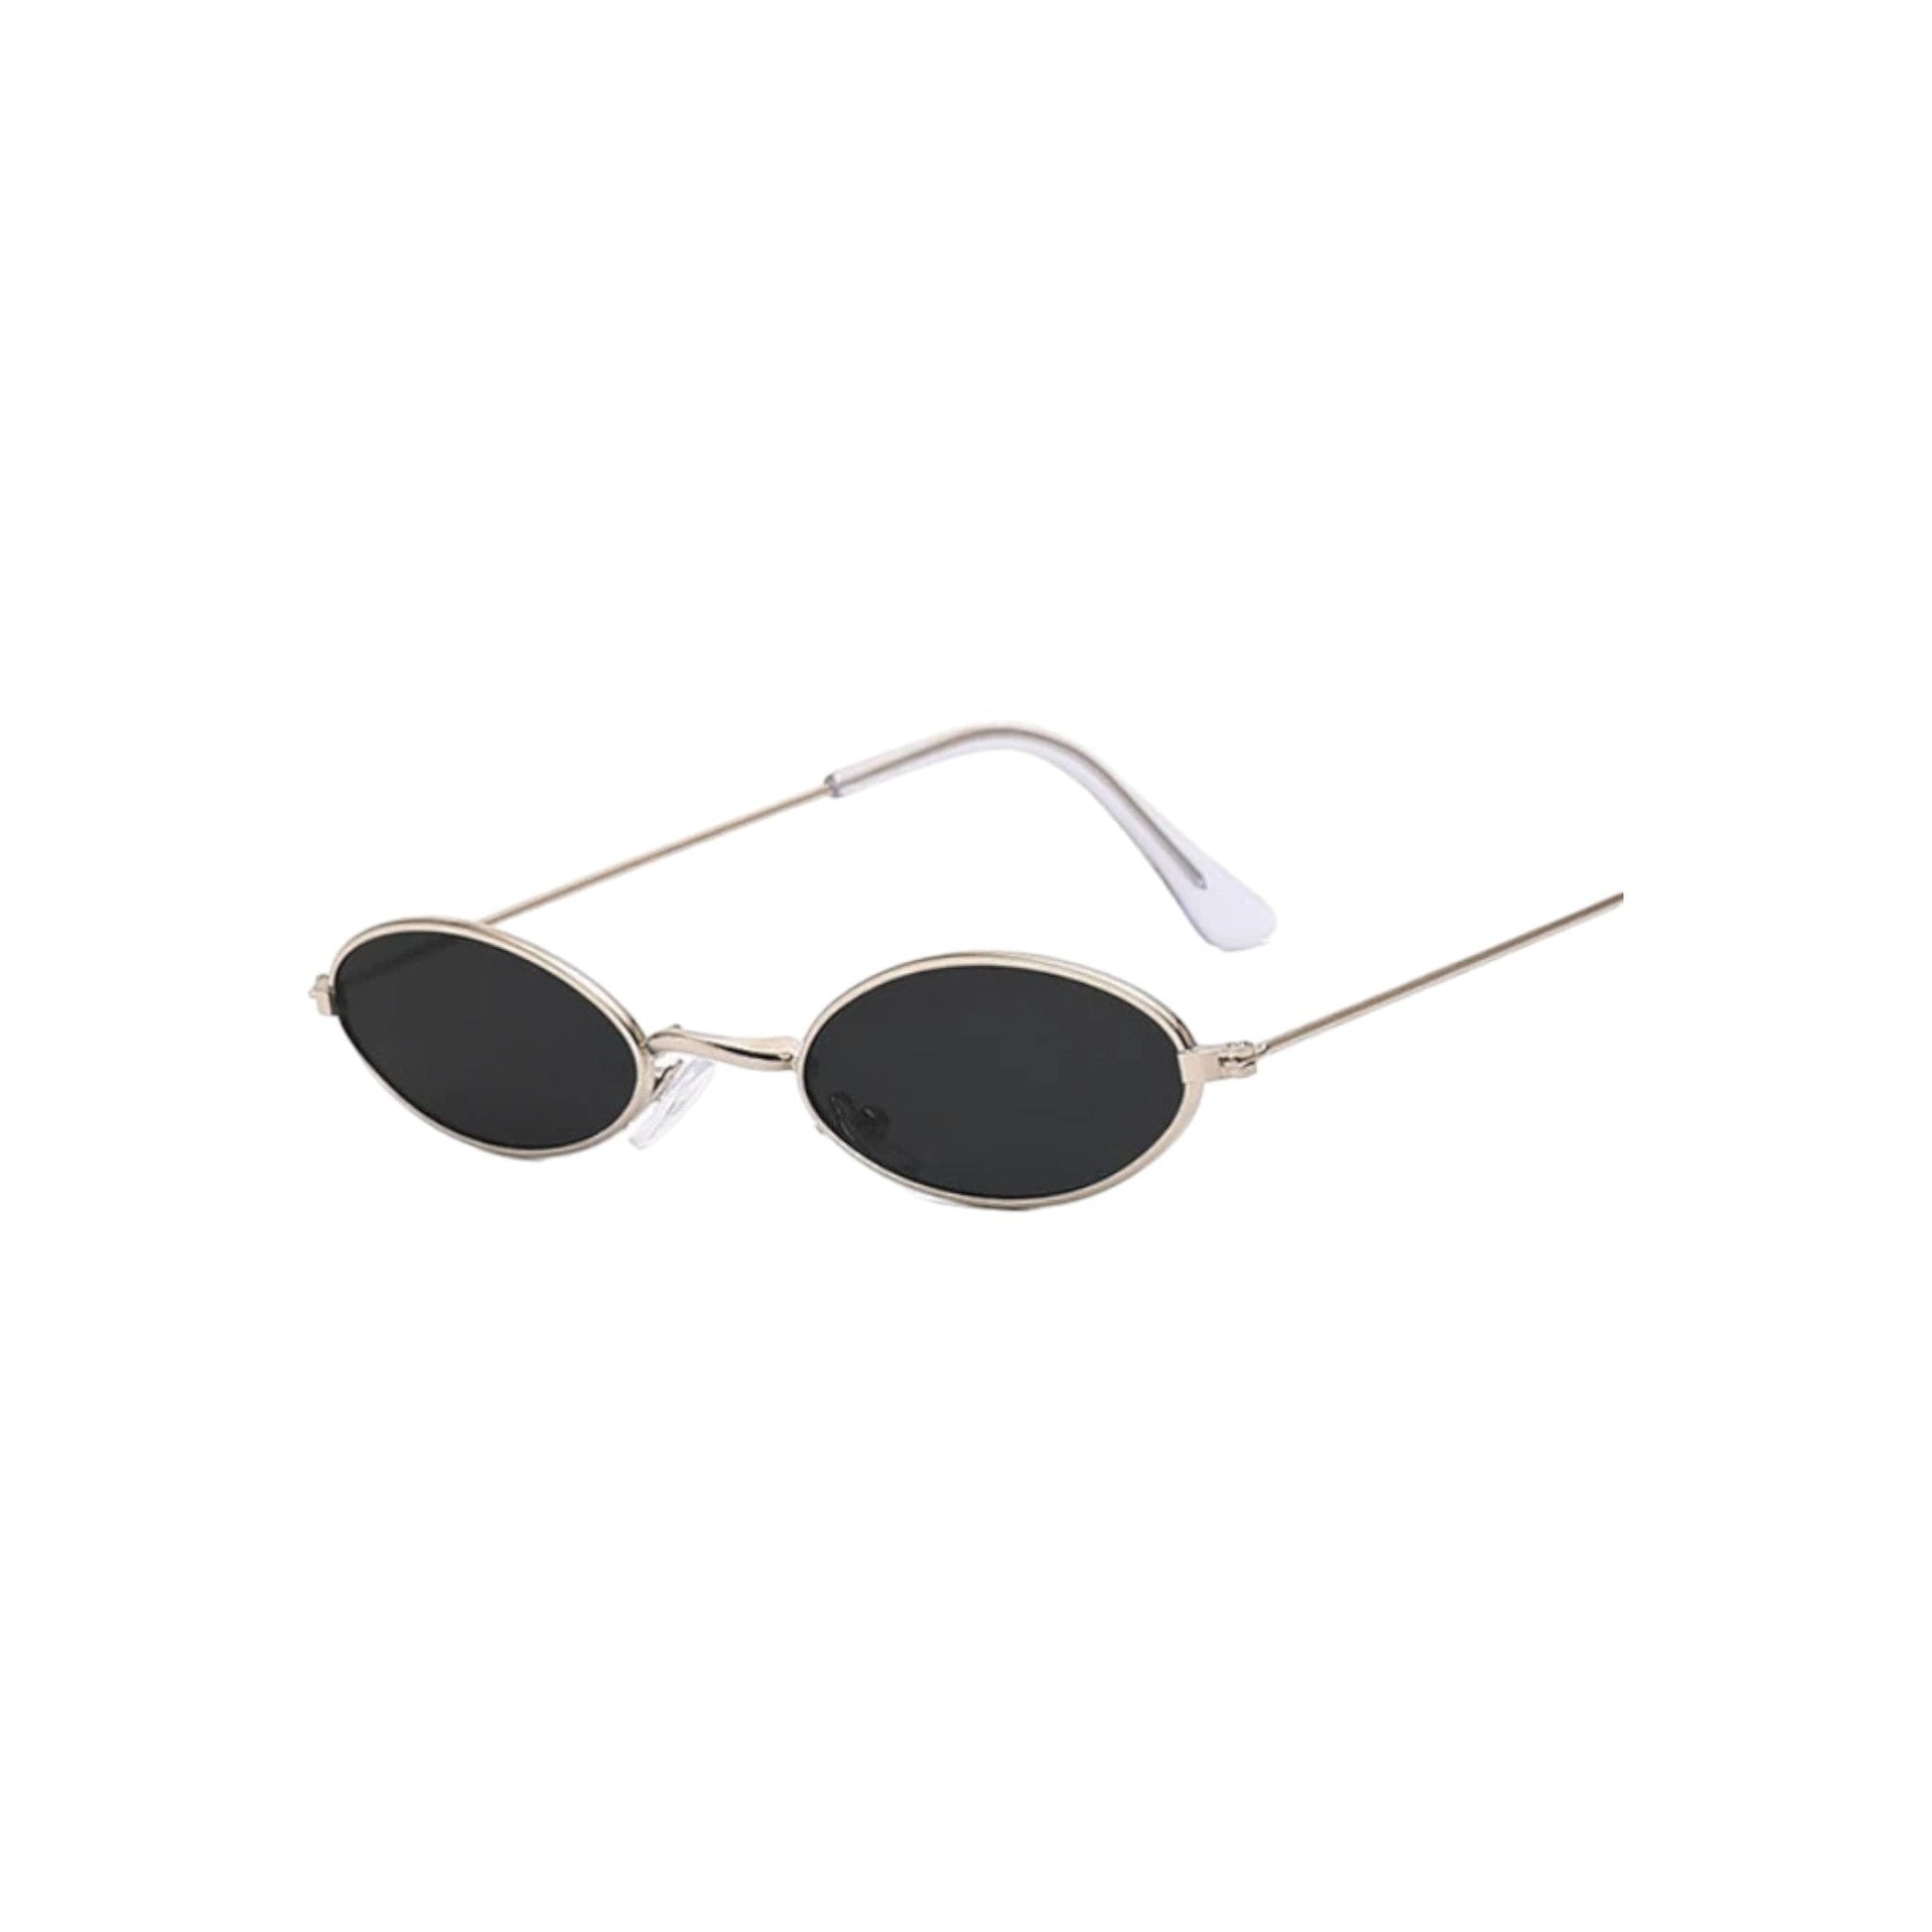 silver frame gray lens Unisex Oval Sunglasses Cannes